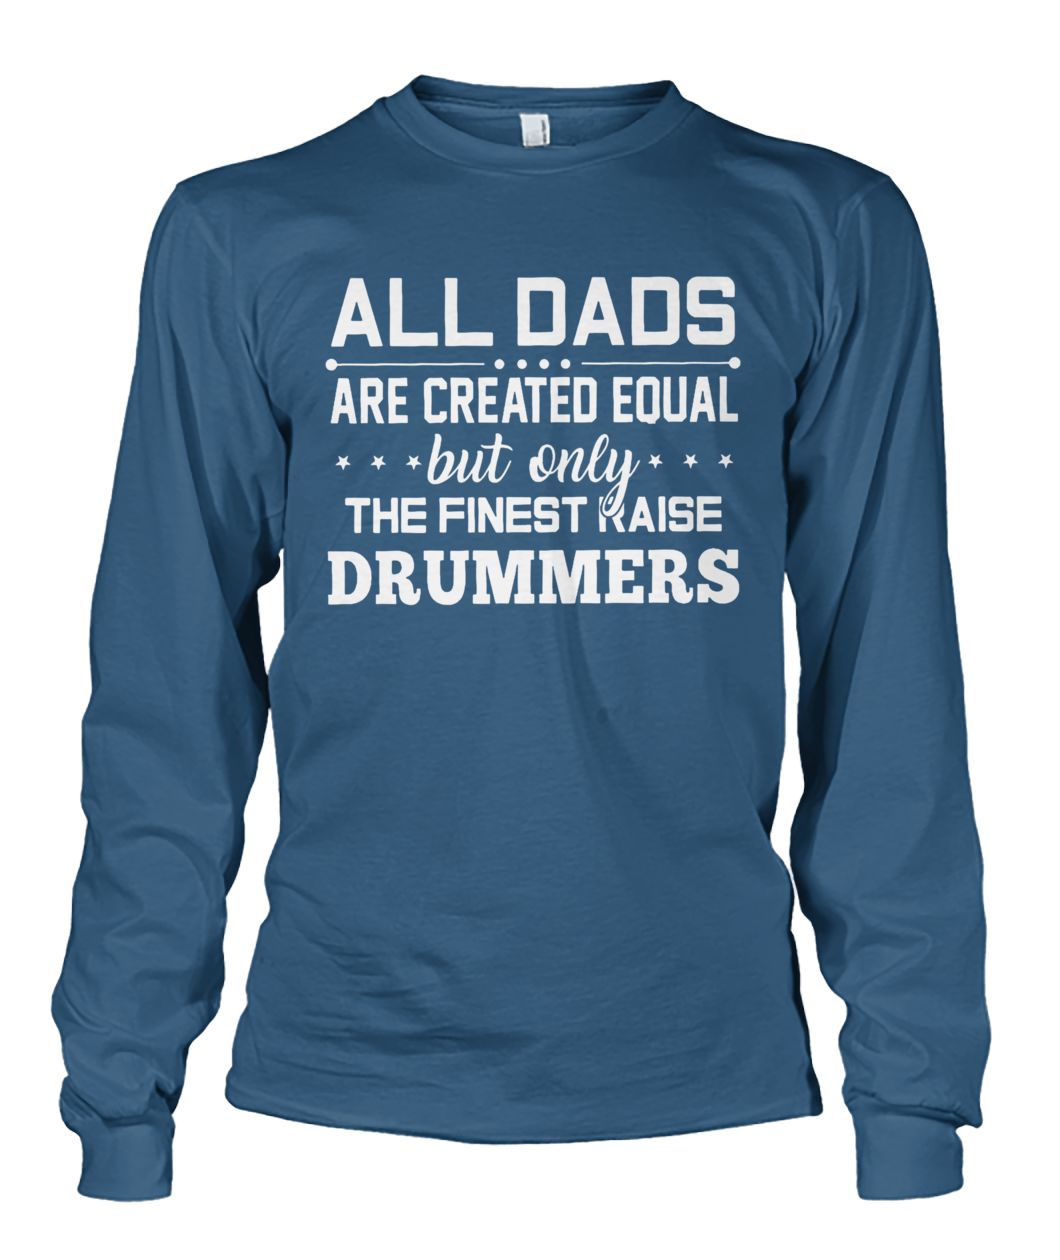 All dads are created equal but only the finest raise drummers unisex long sleeve